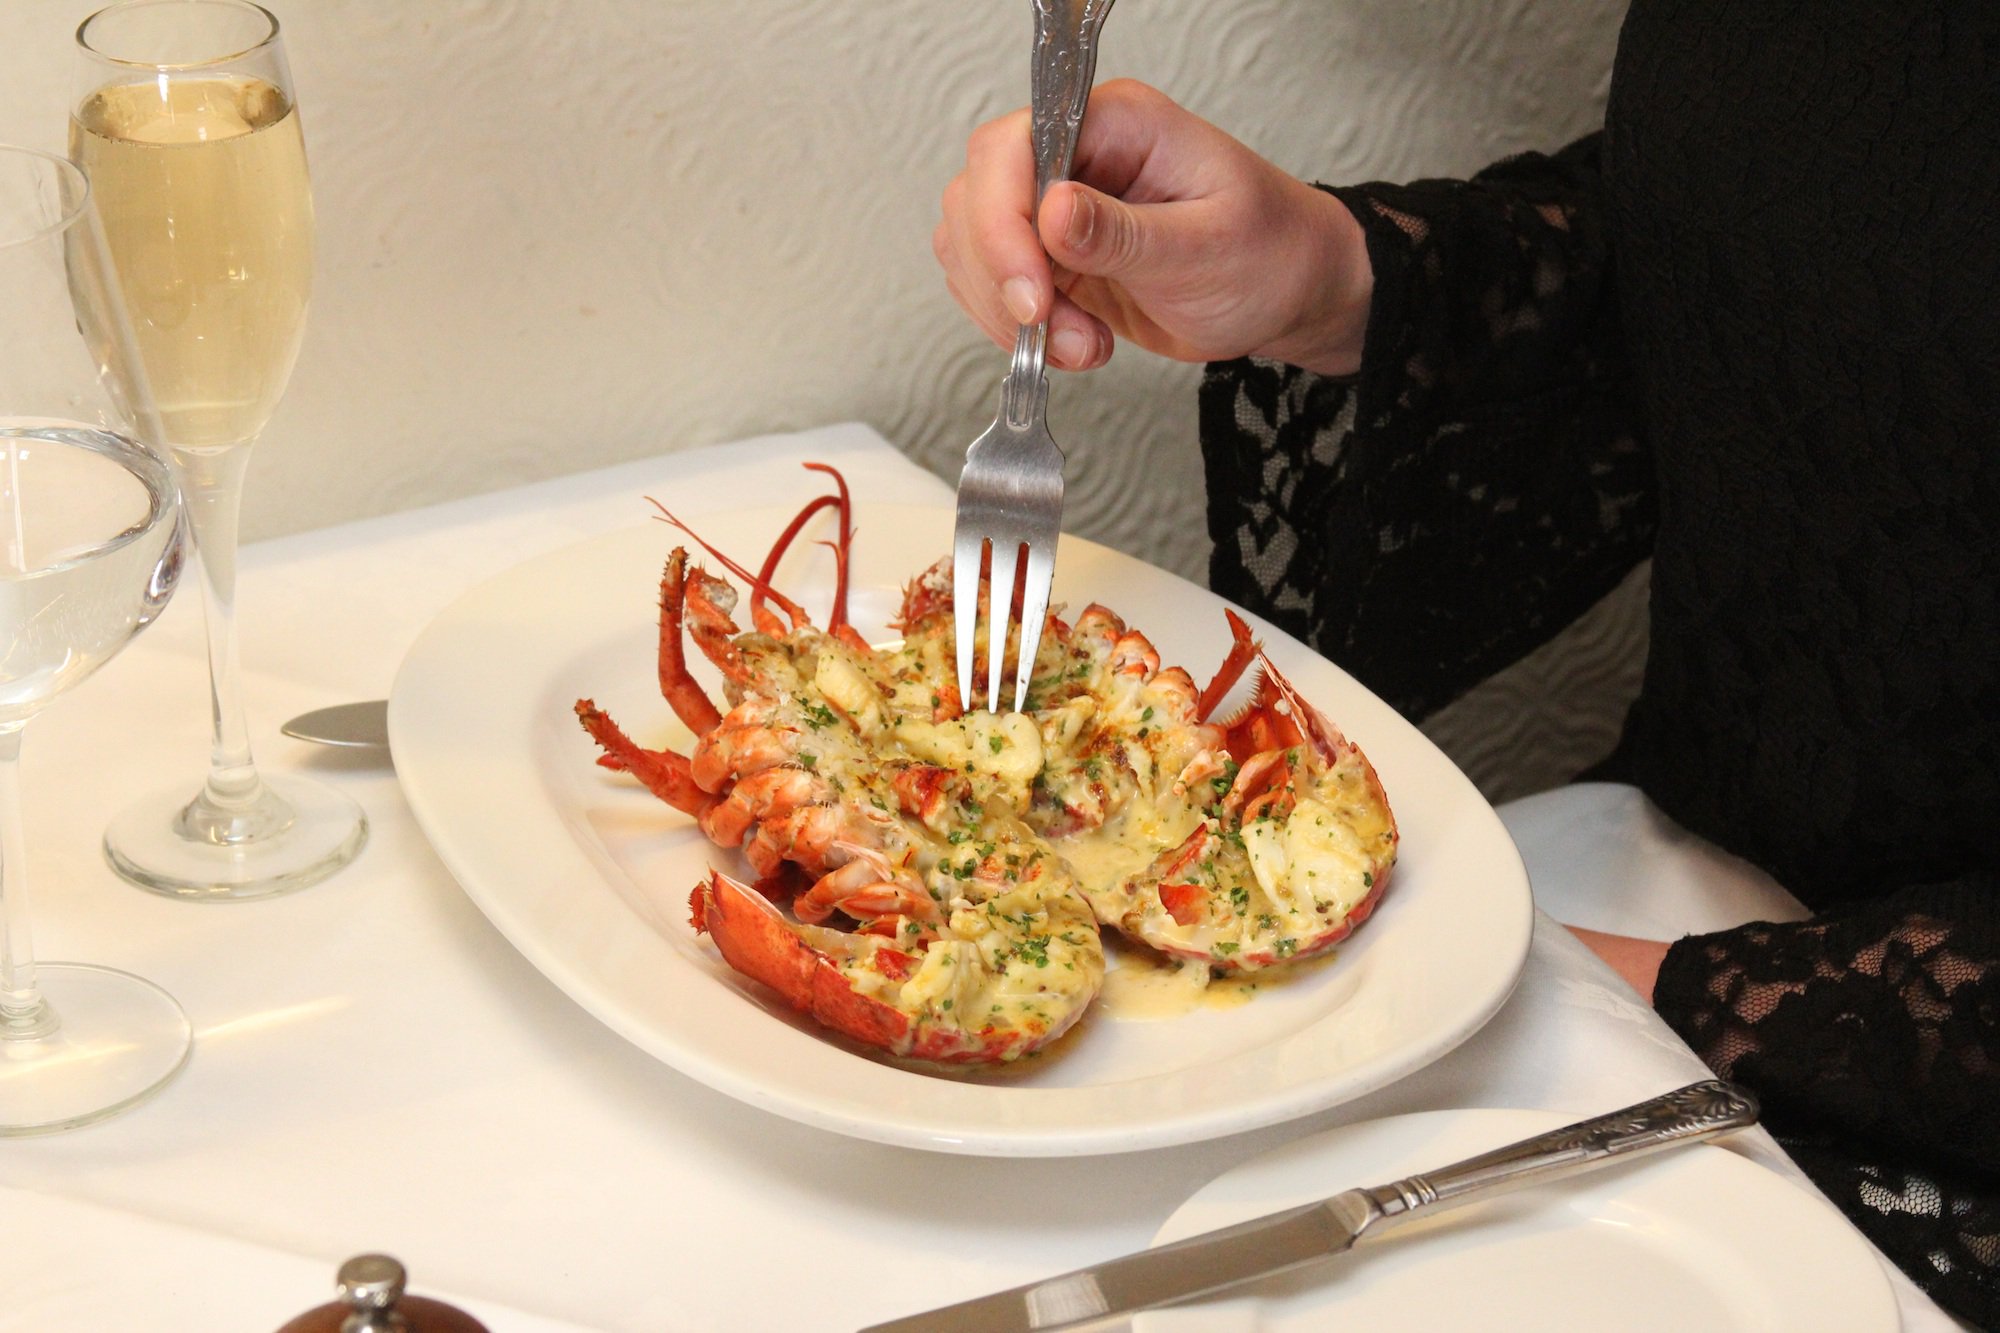 Lobster thermidor at a table about to be eaten